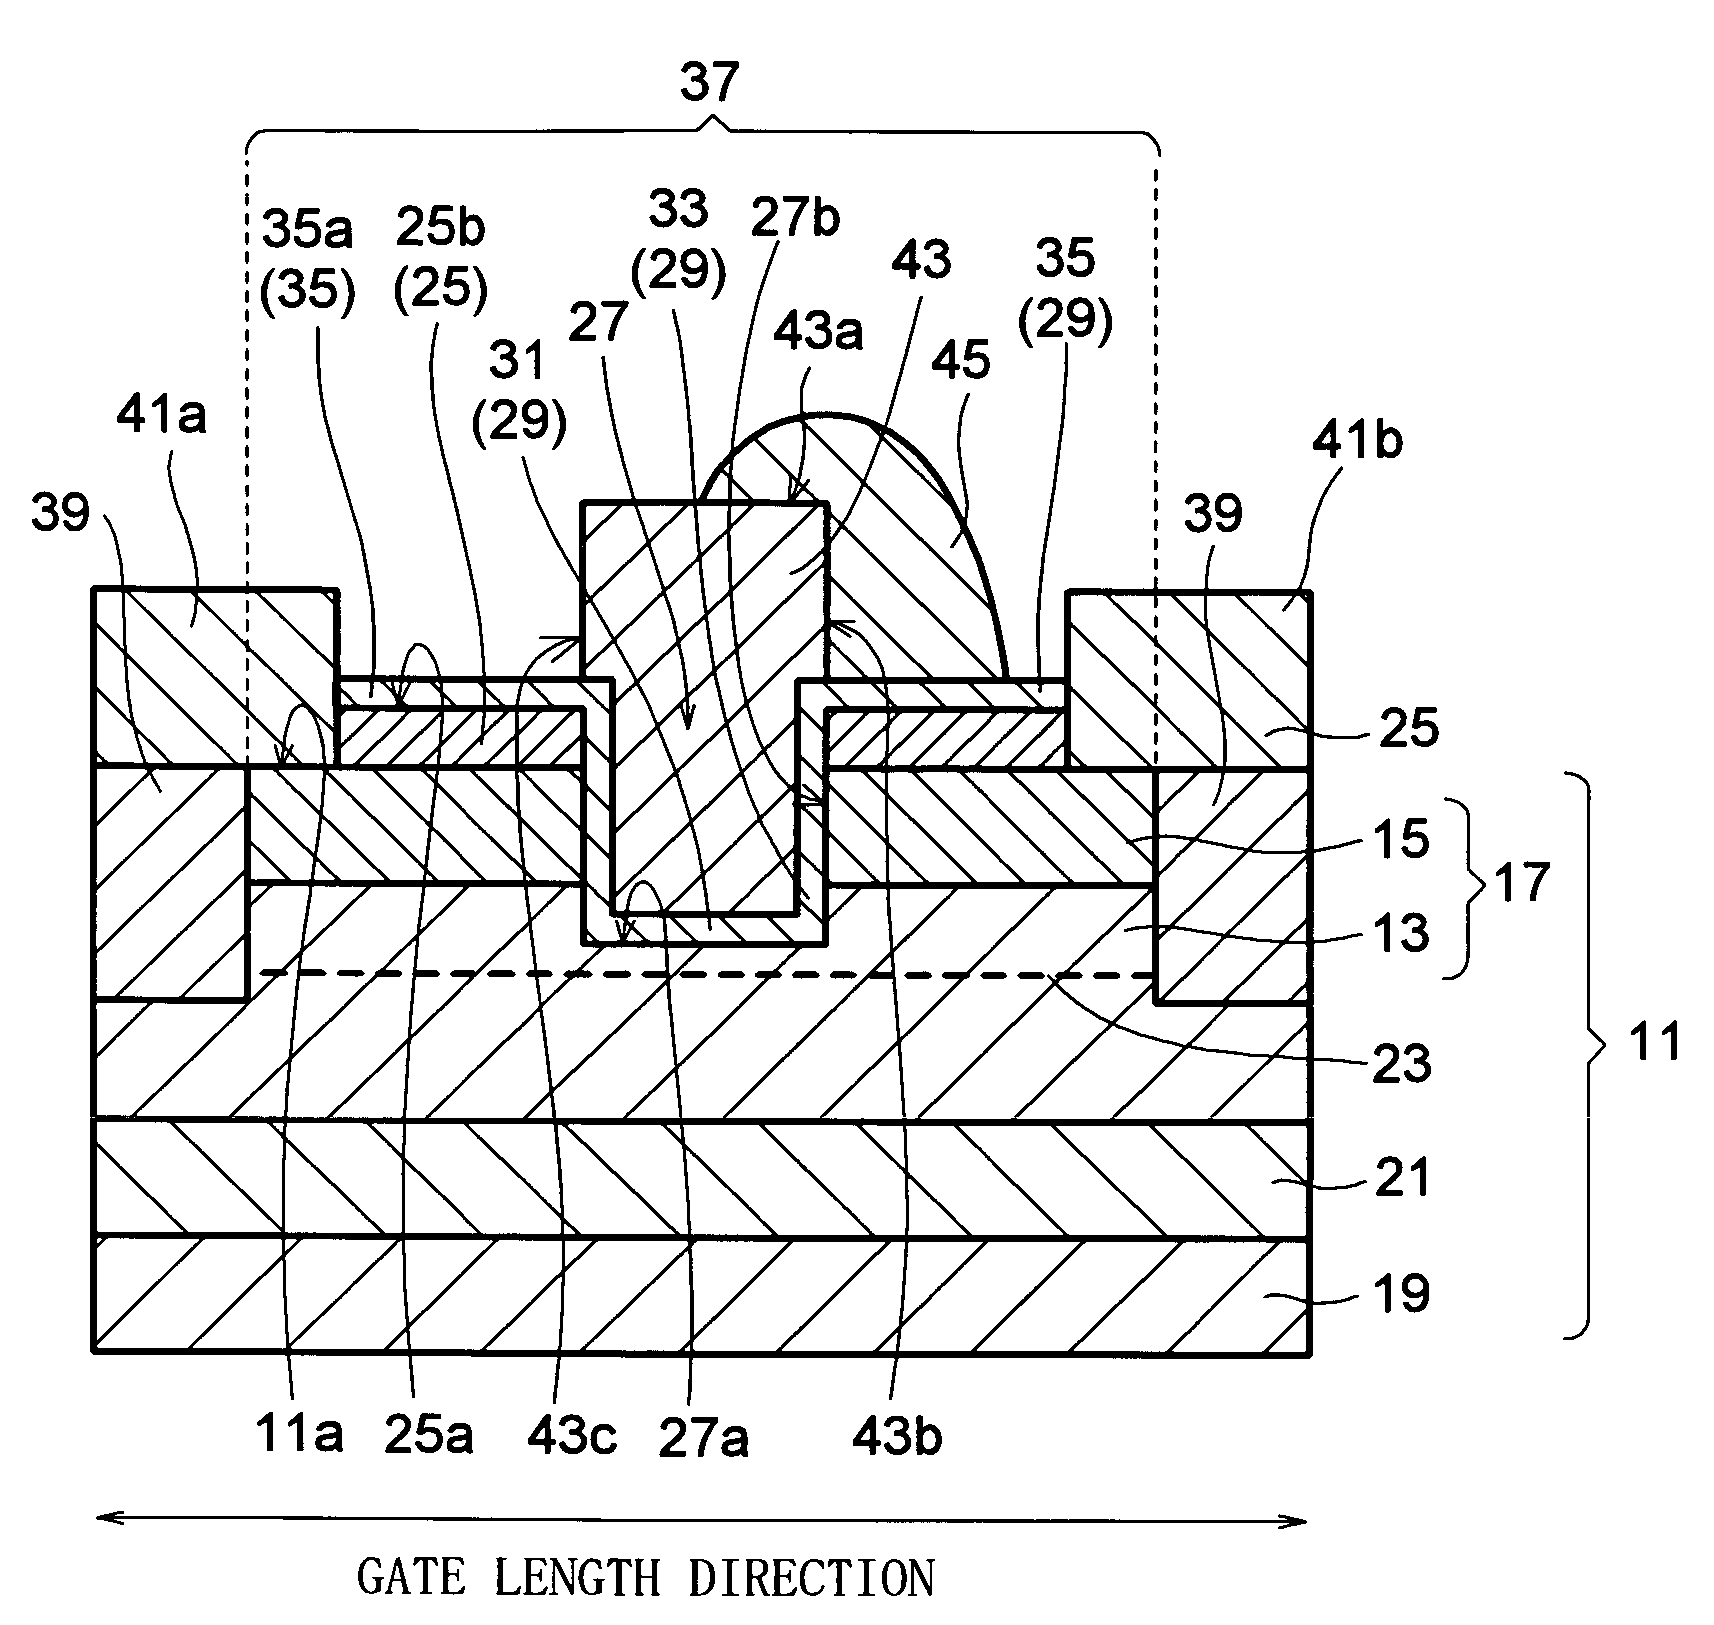 Semiconductor device and manufacturing method